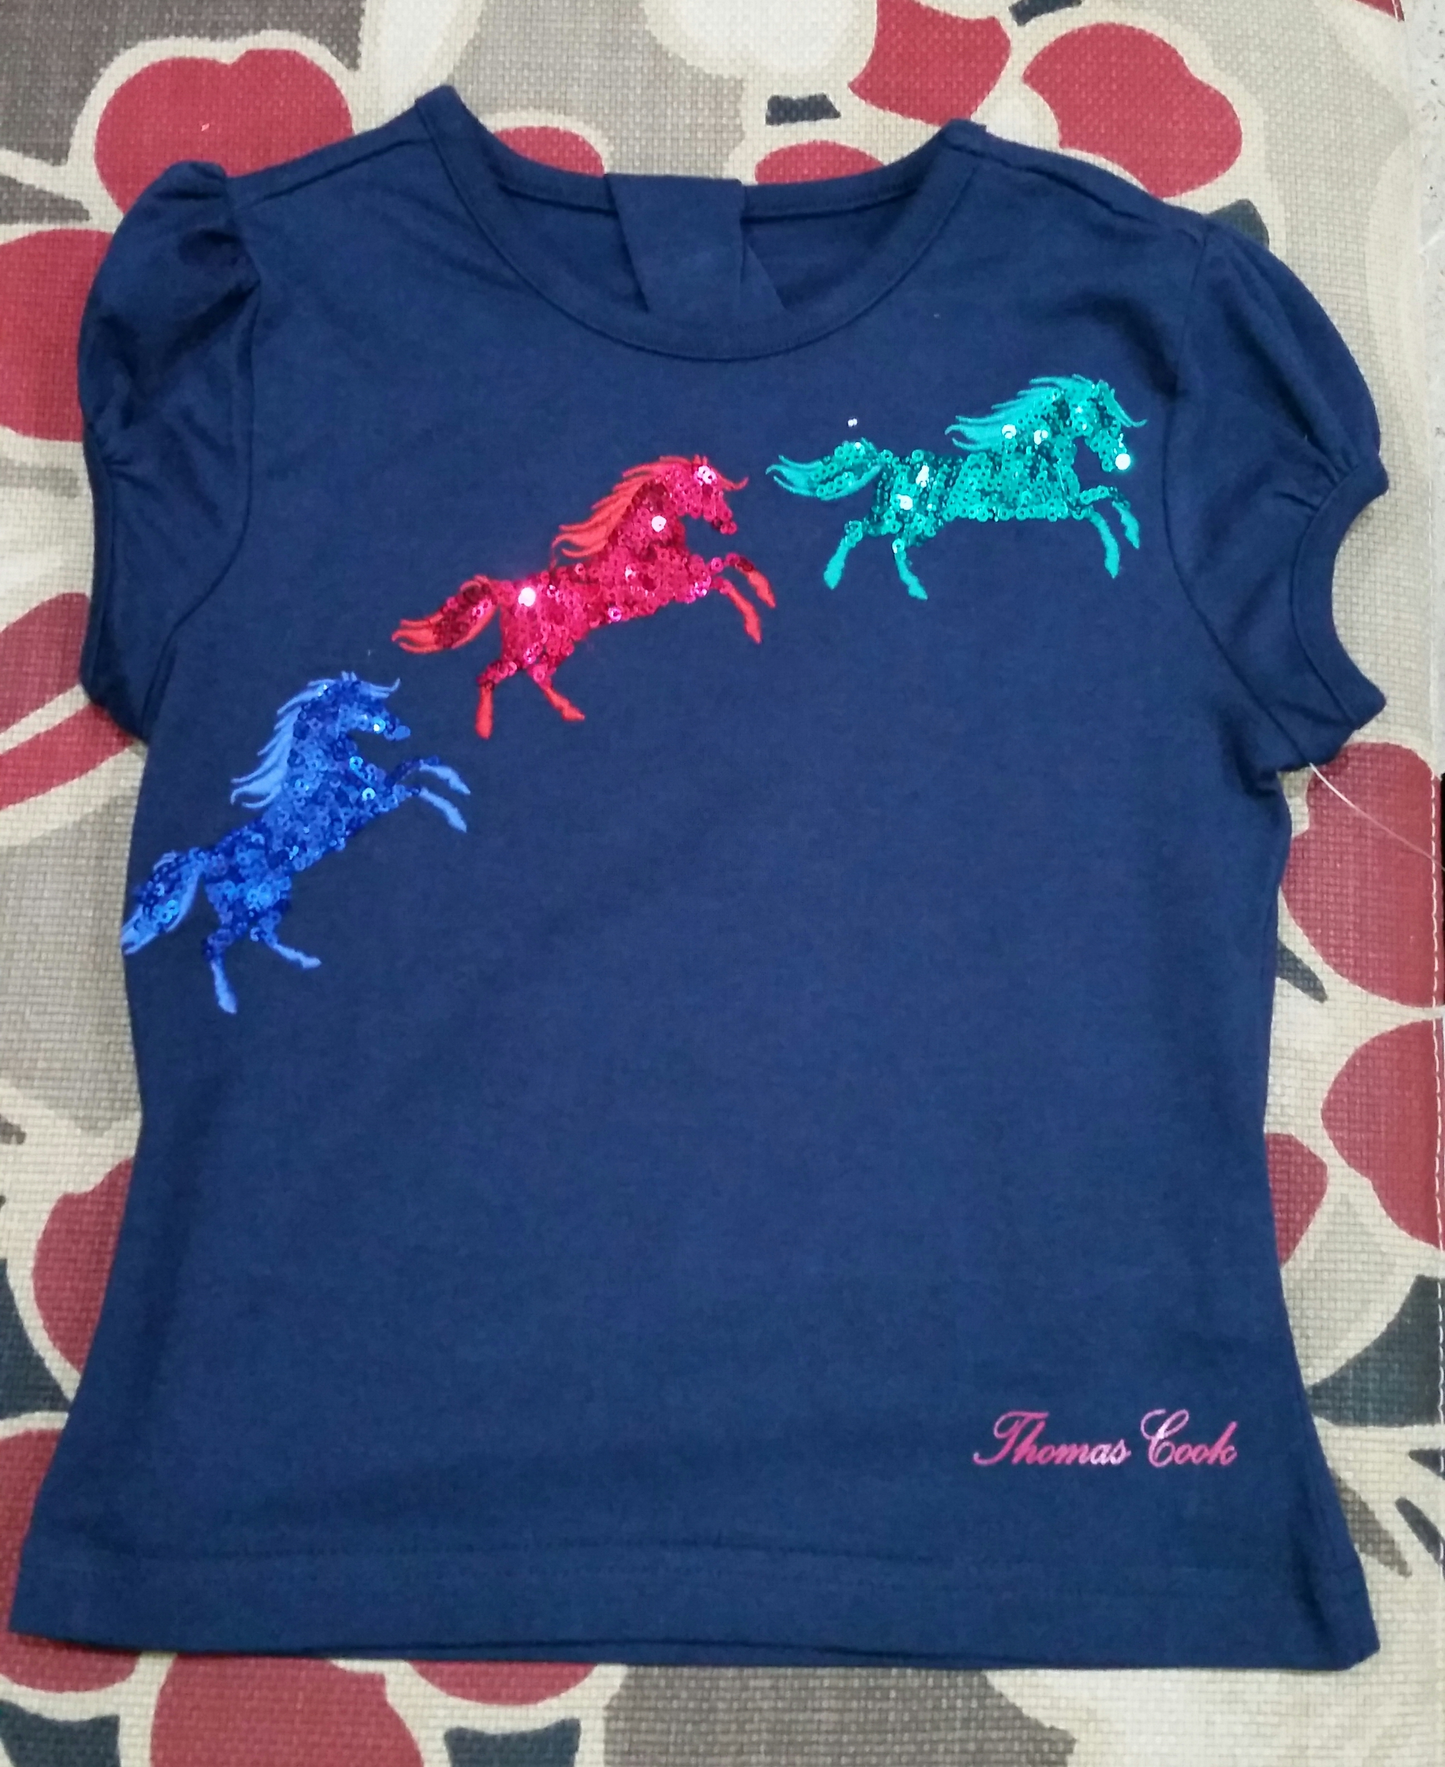 Thomas Cook Girls Jumping Horses Sequin Tee